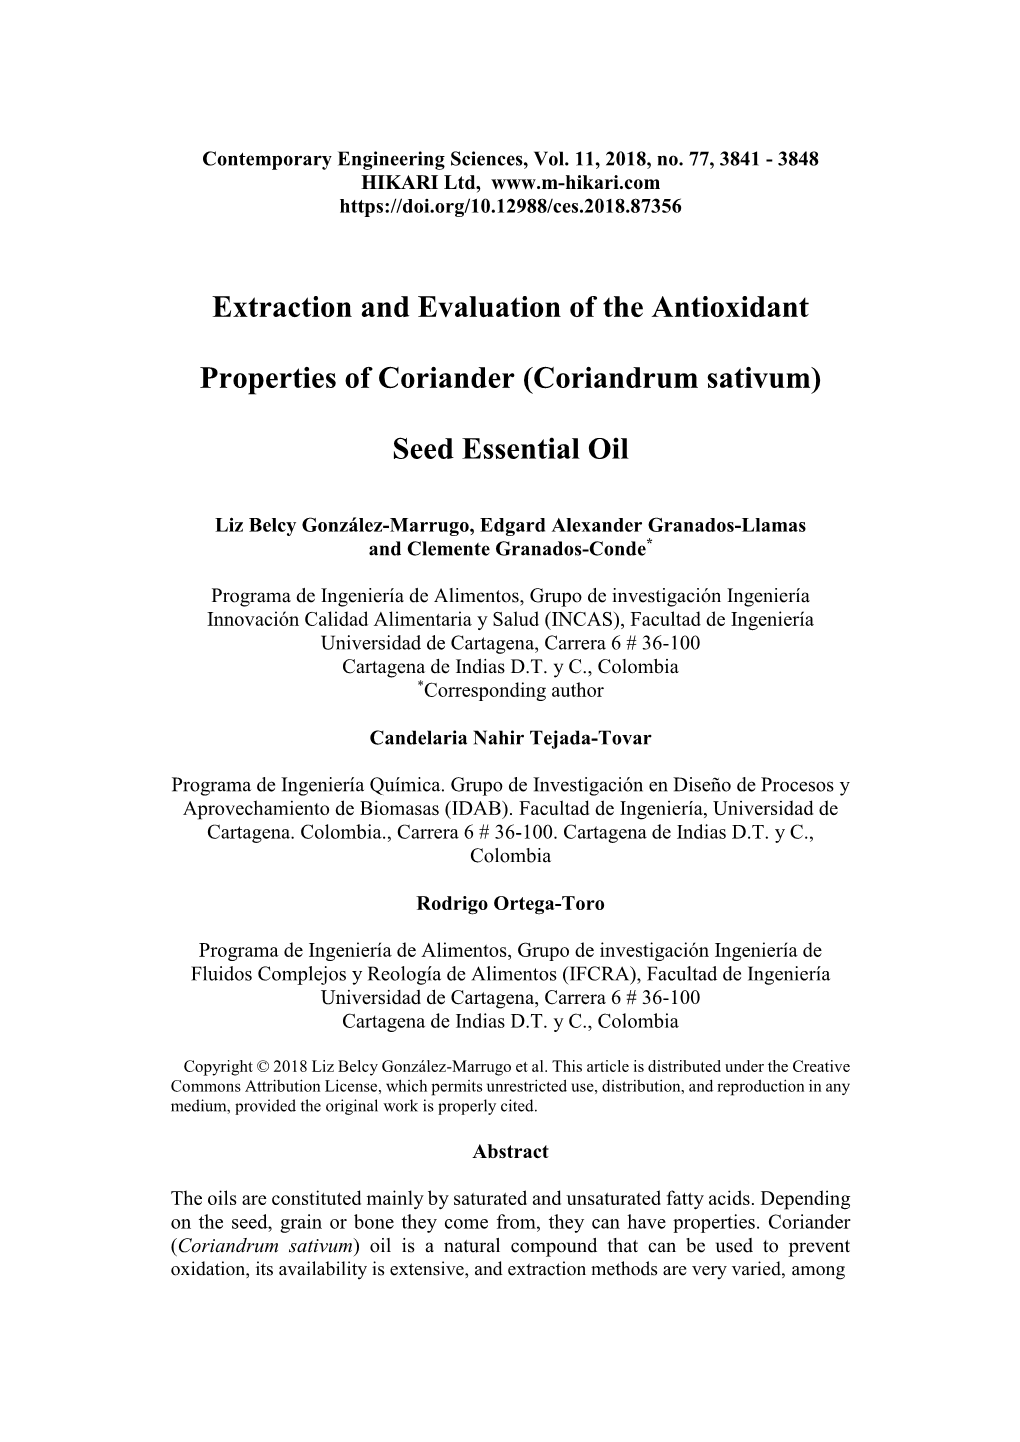 Extraction and Evaluation of the Antioxidant Properties of Coriander